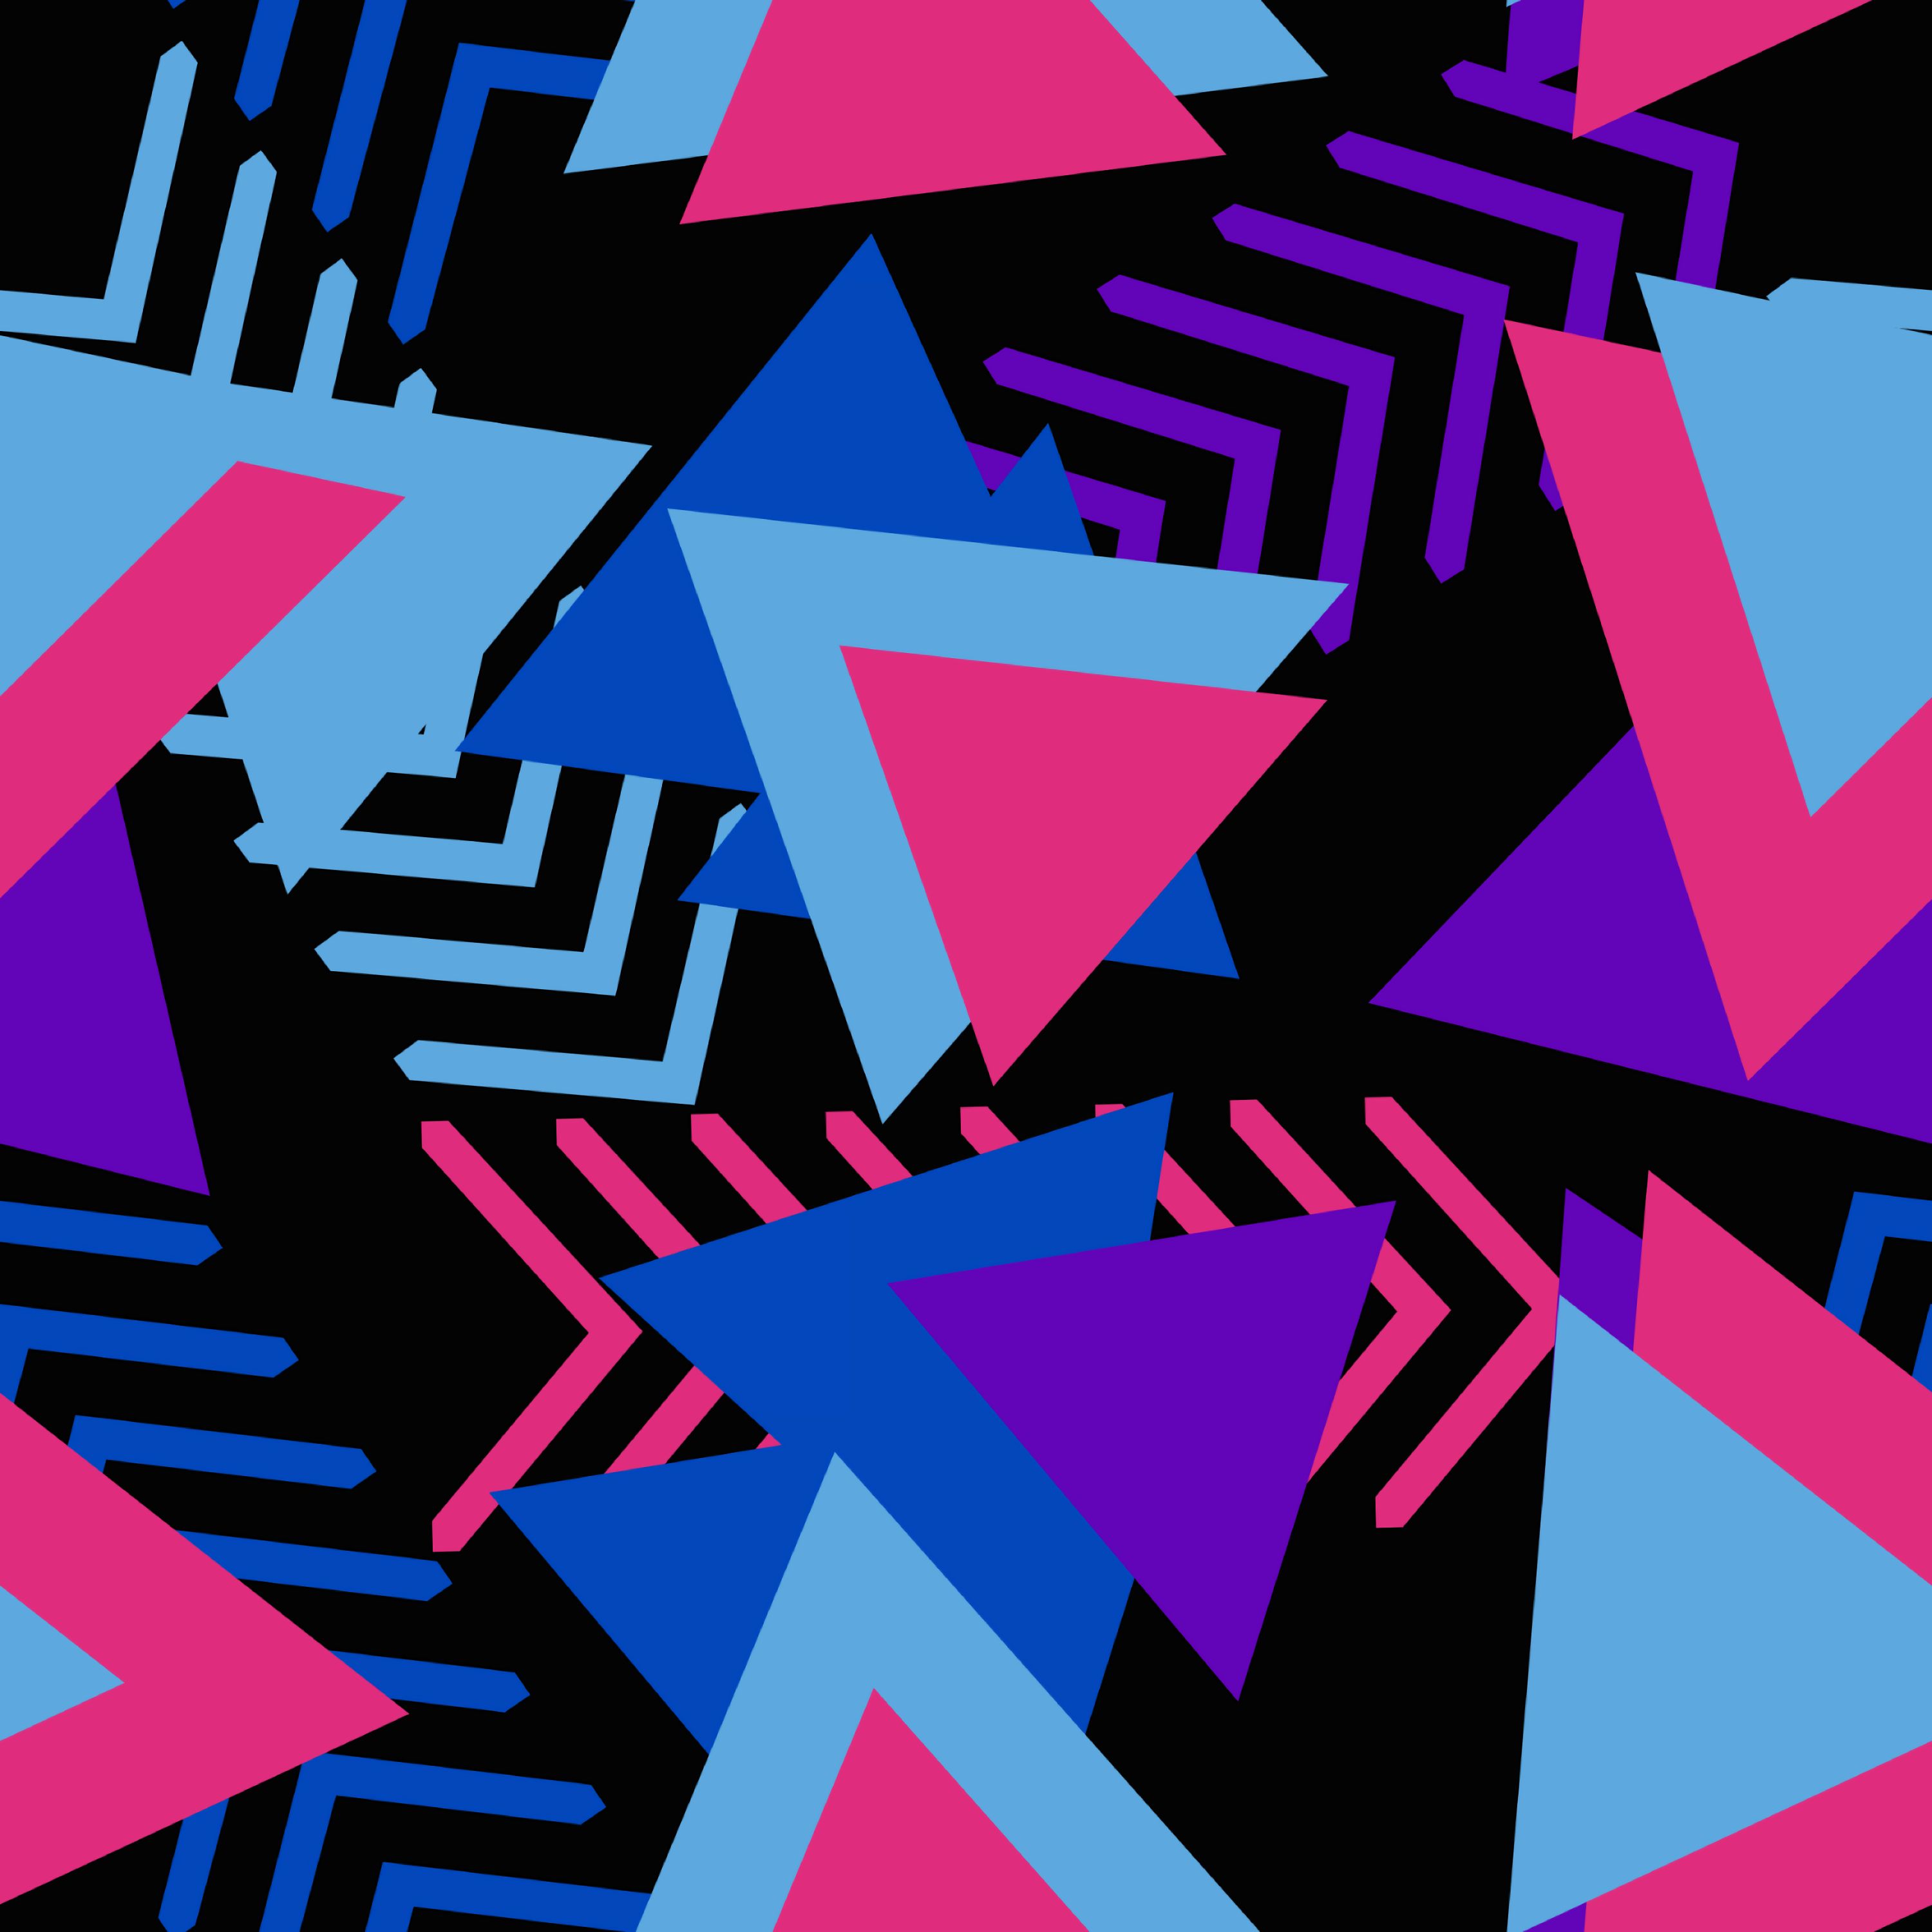 motley, multicolored, texture, textures, form, forms, geometric, triangle, triangles 1080p